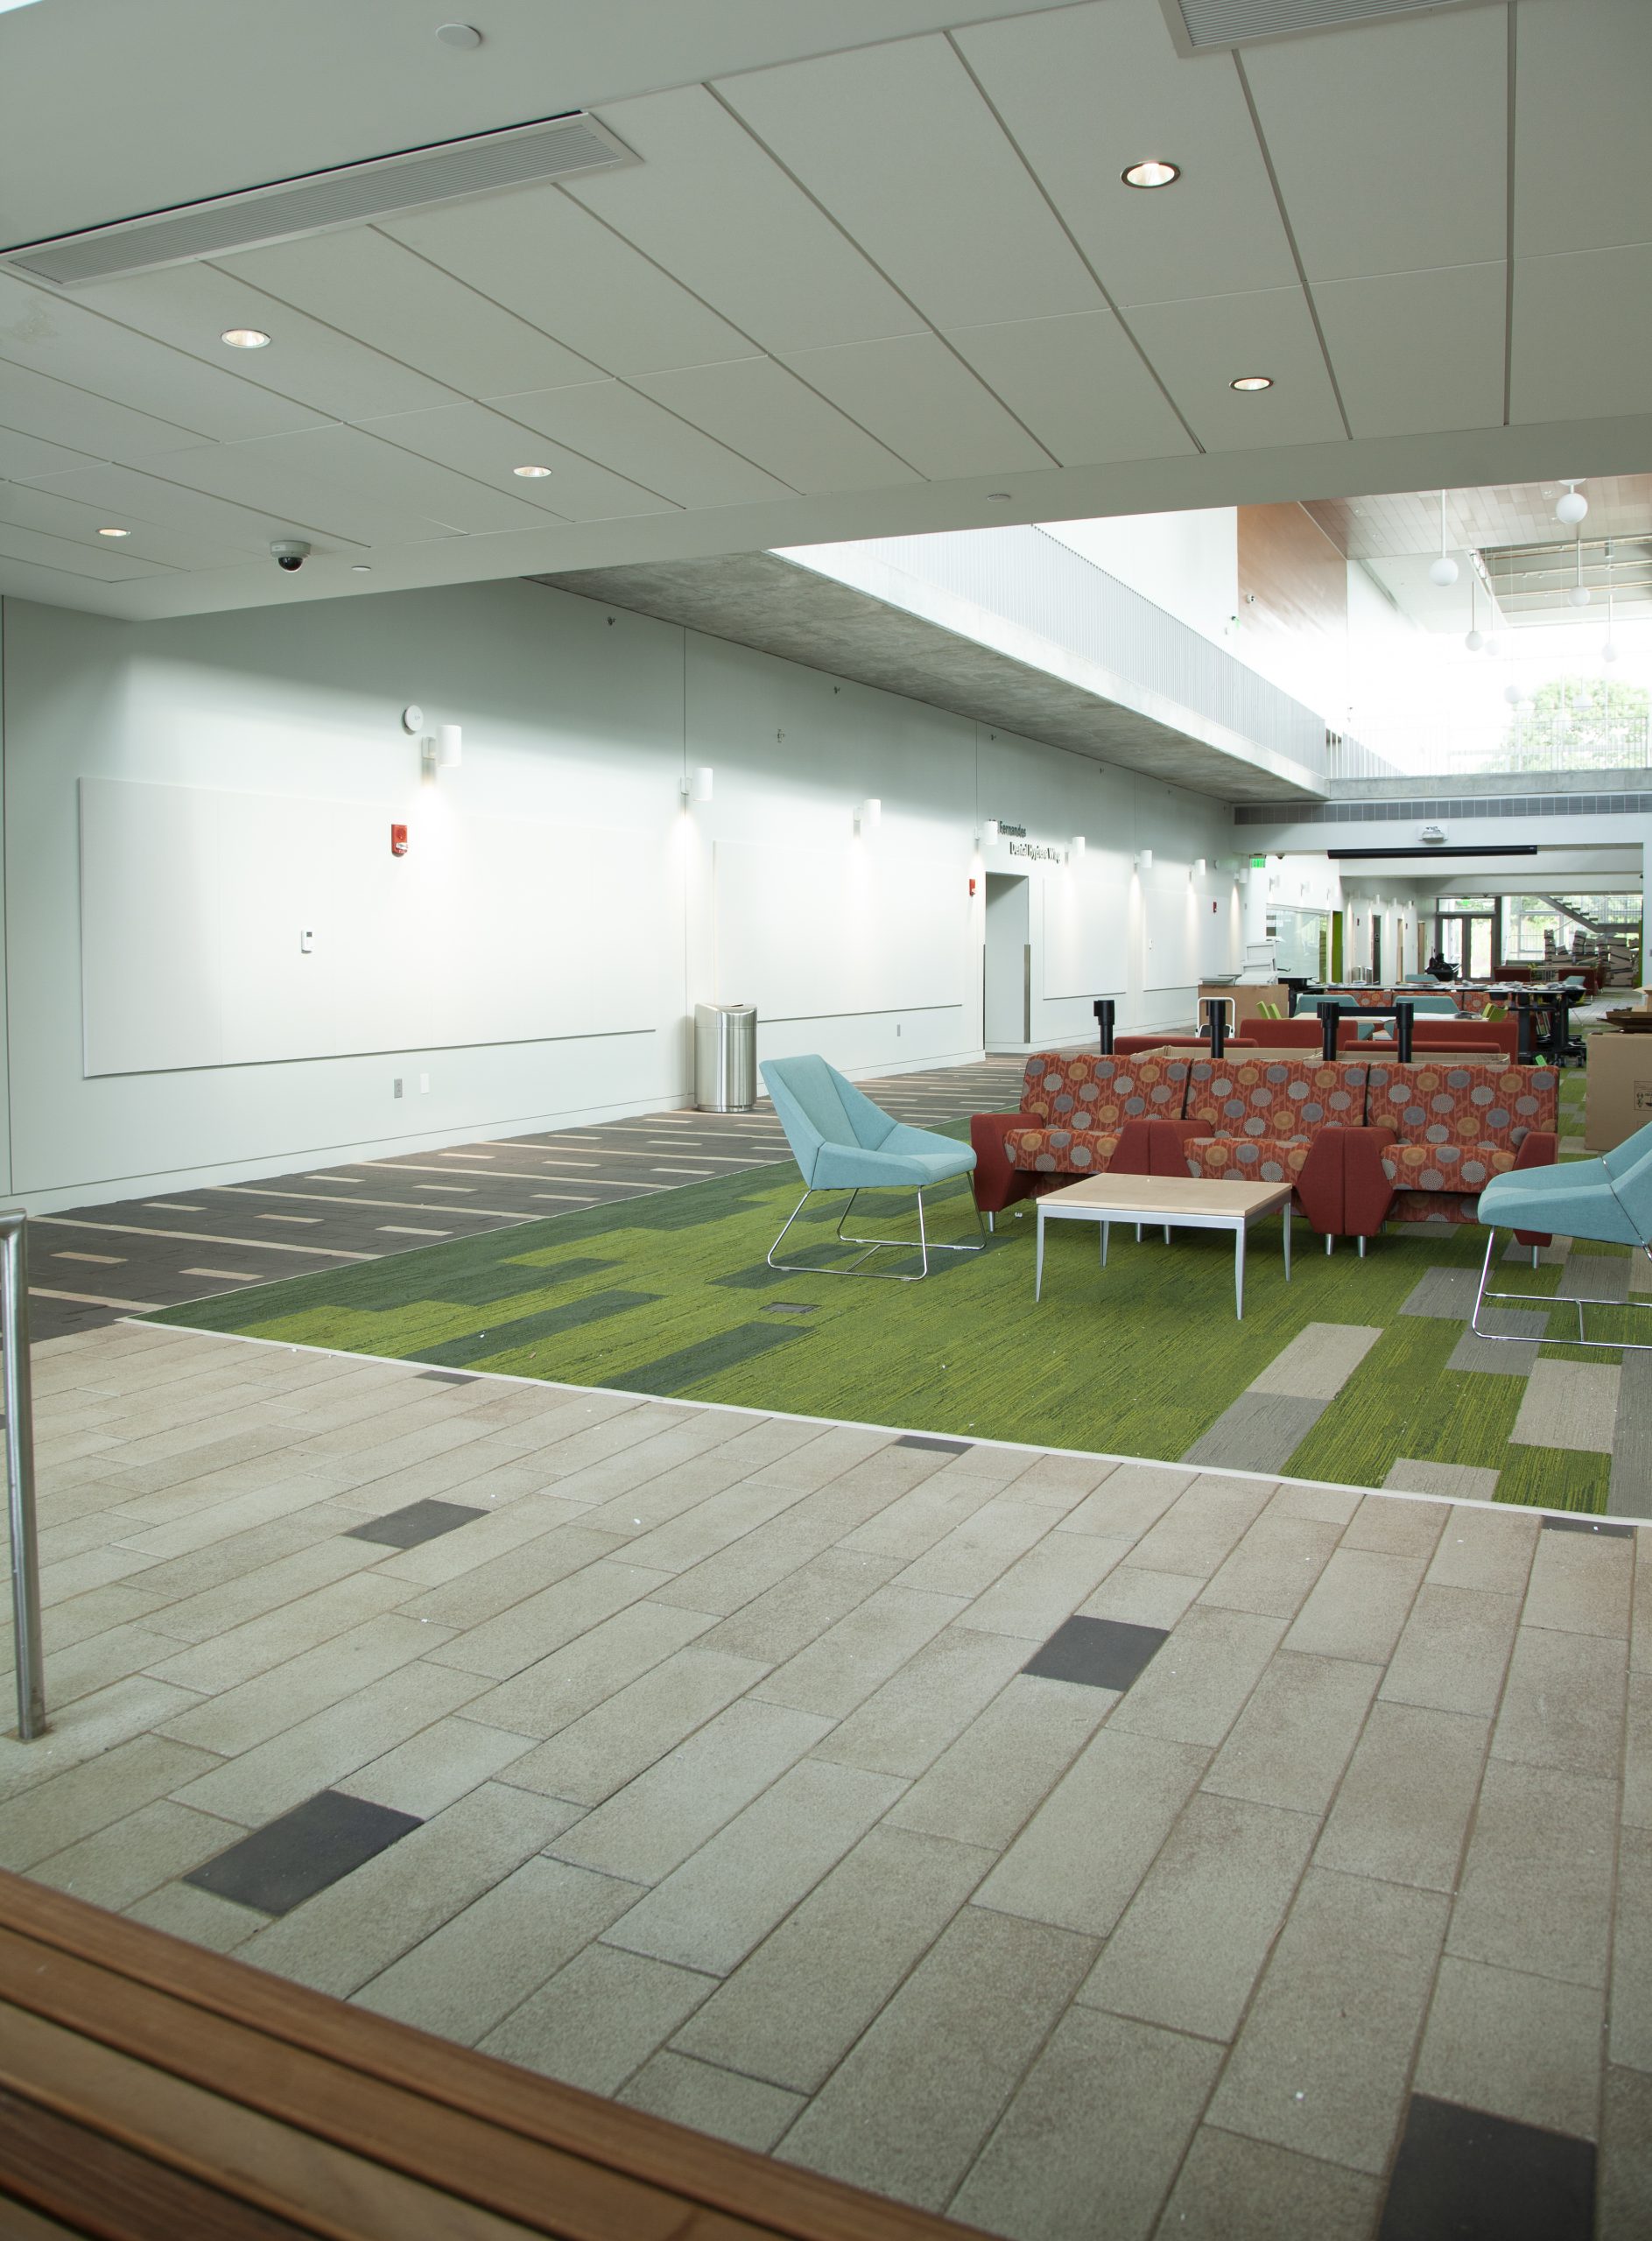 Promenade Plank Pavers delineate a path through a college building on the main floor, using bold stripe patterns in contrasting colors.